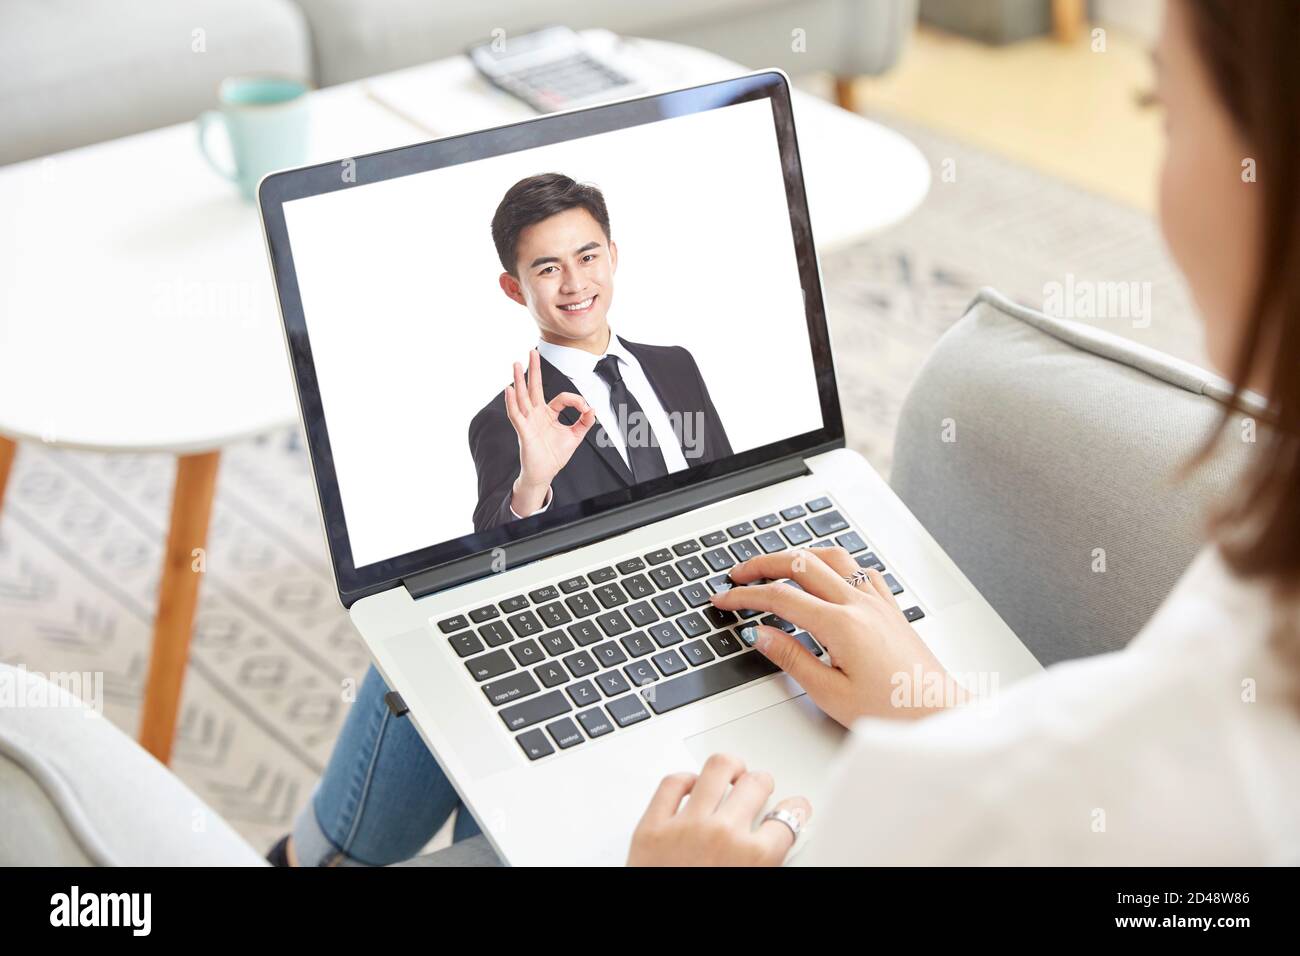 young asian business woman working from home meeting with colleague online via video chat using laptop computer Stock Photo